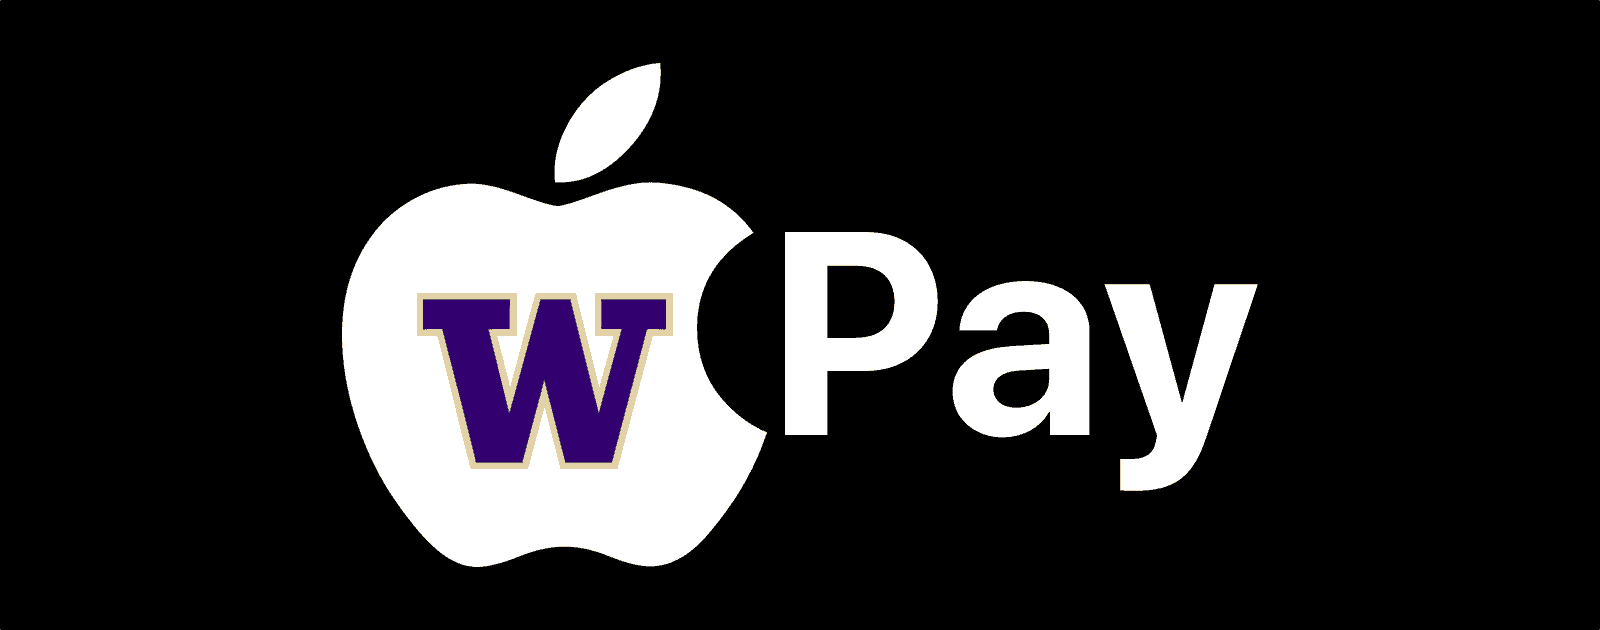 Apple is Doing a College Apple Pay Promotion at the University of Washington